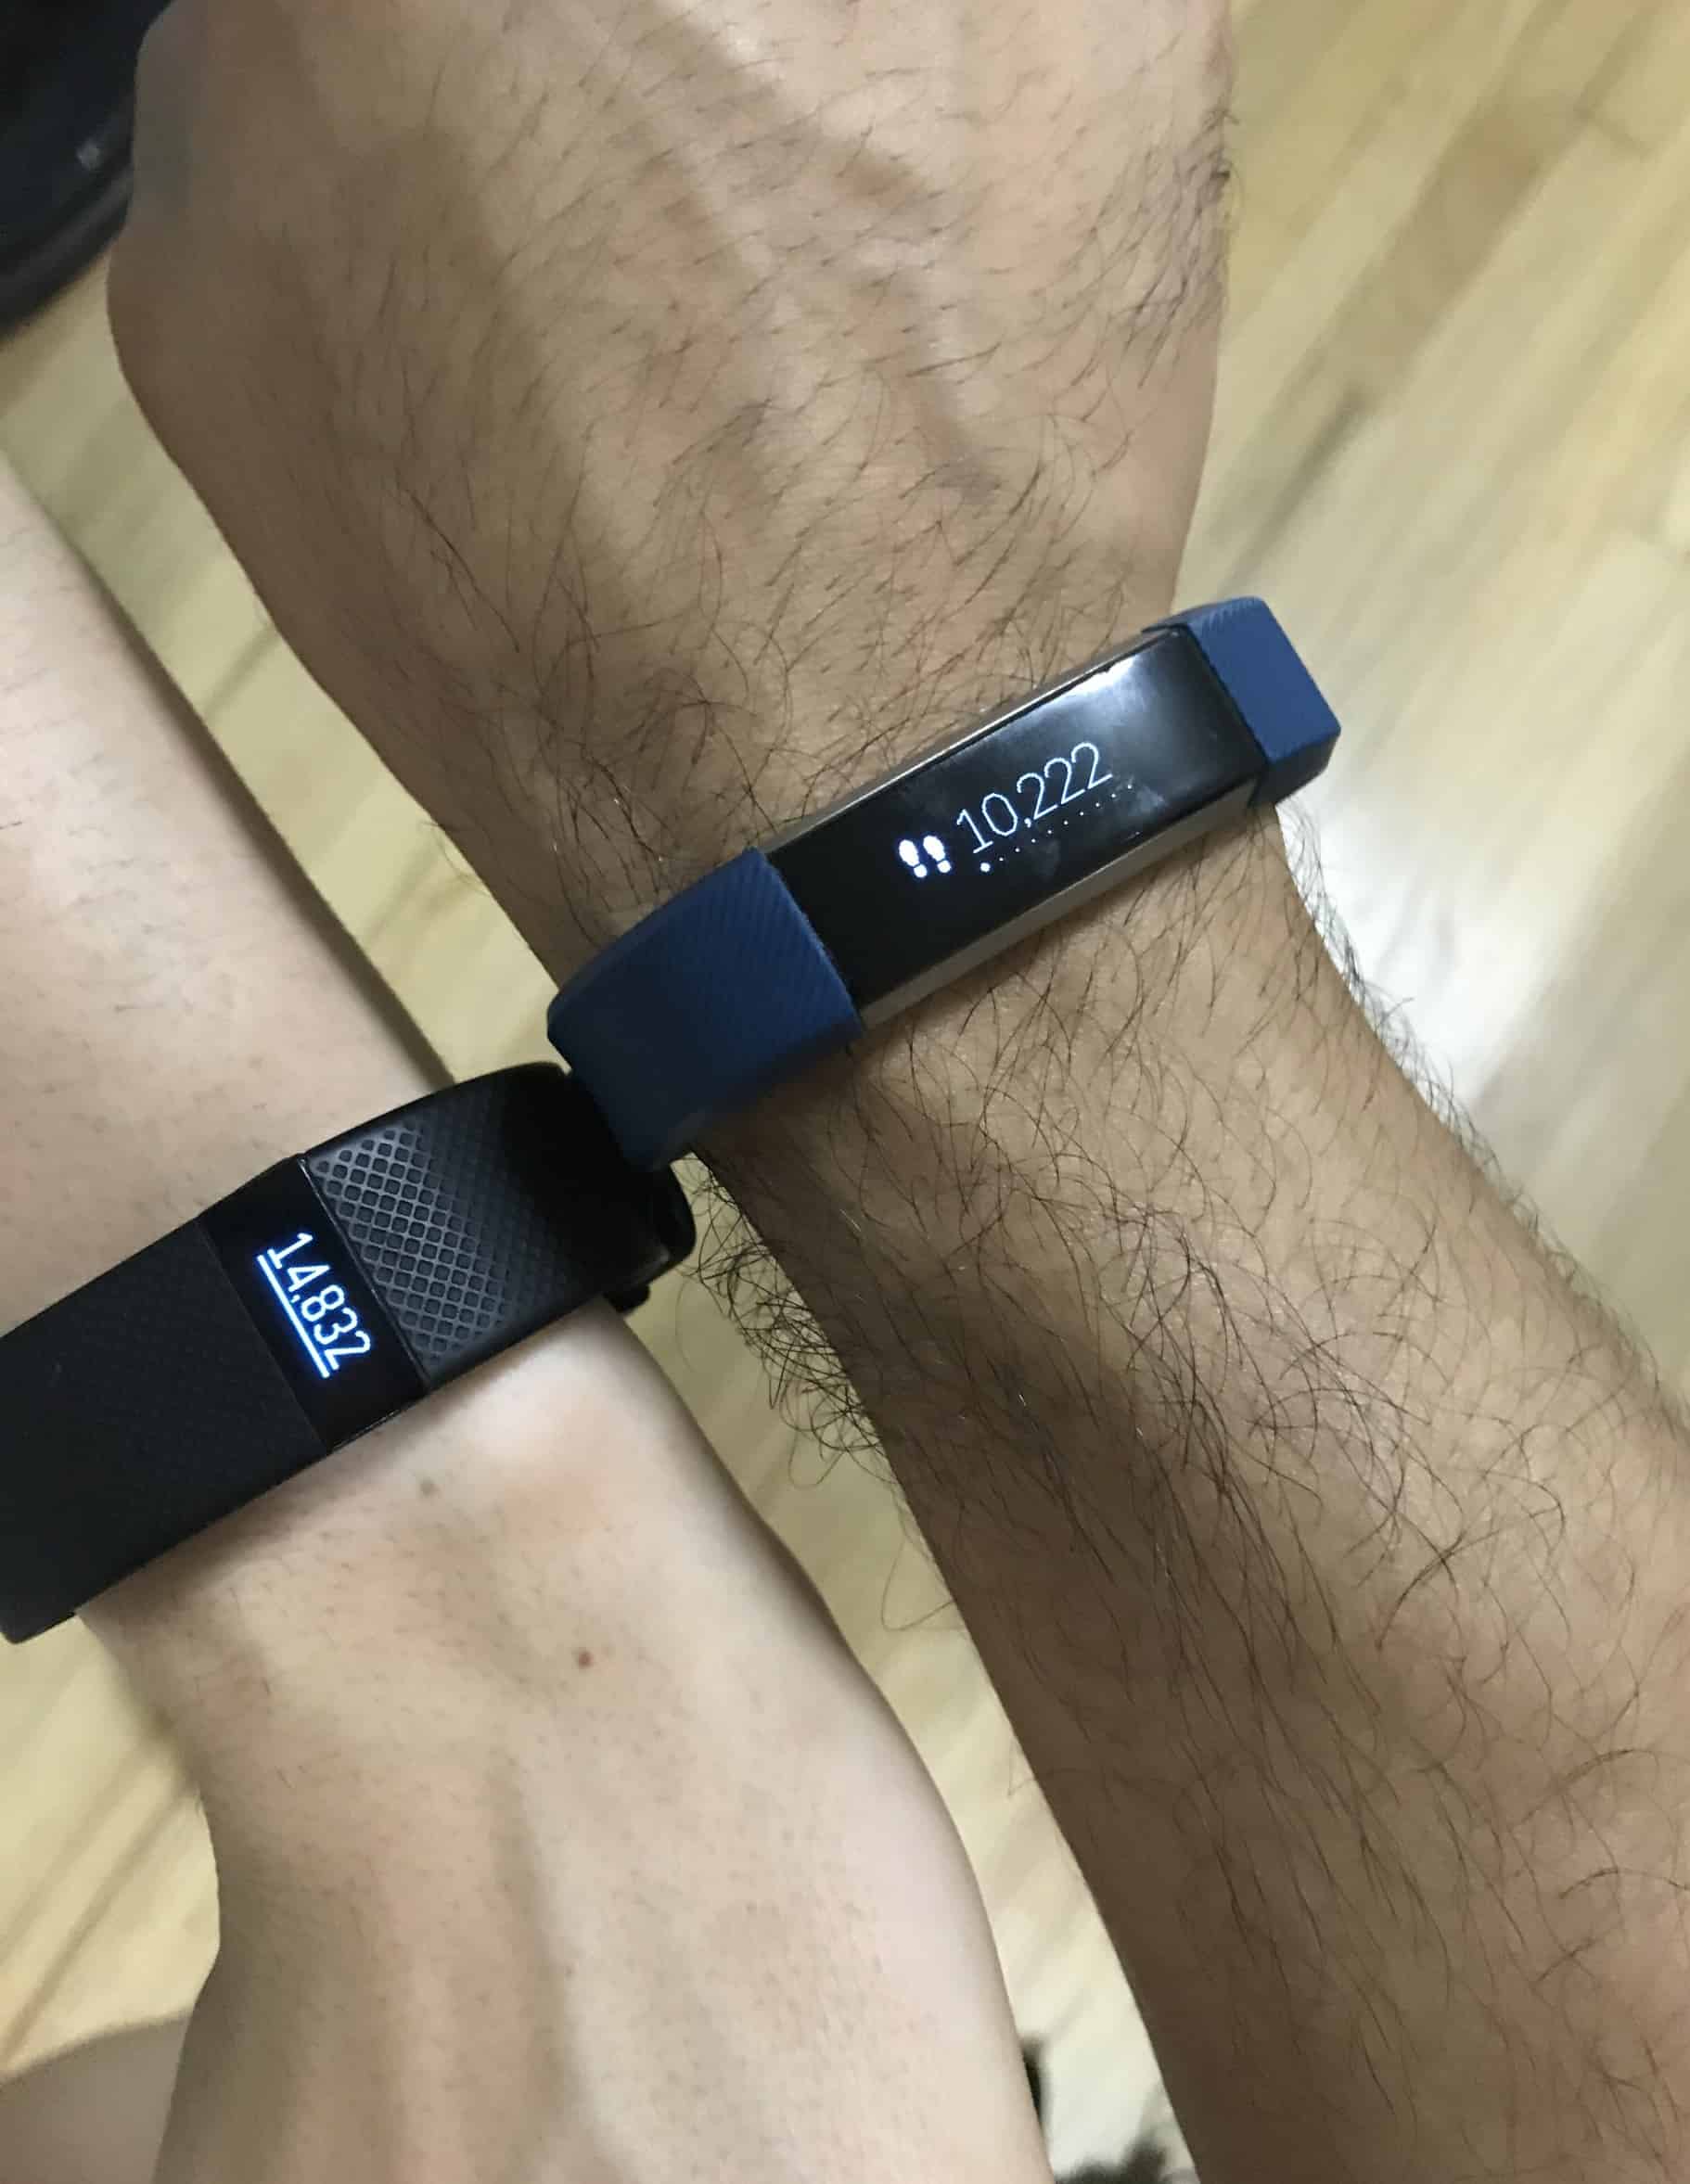 image of our step trackers showing over 10,000 steps a day on each one- mine with 10,222 and hers with 14,832